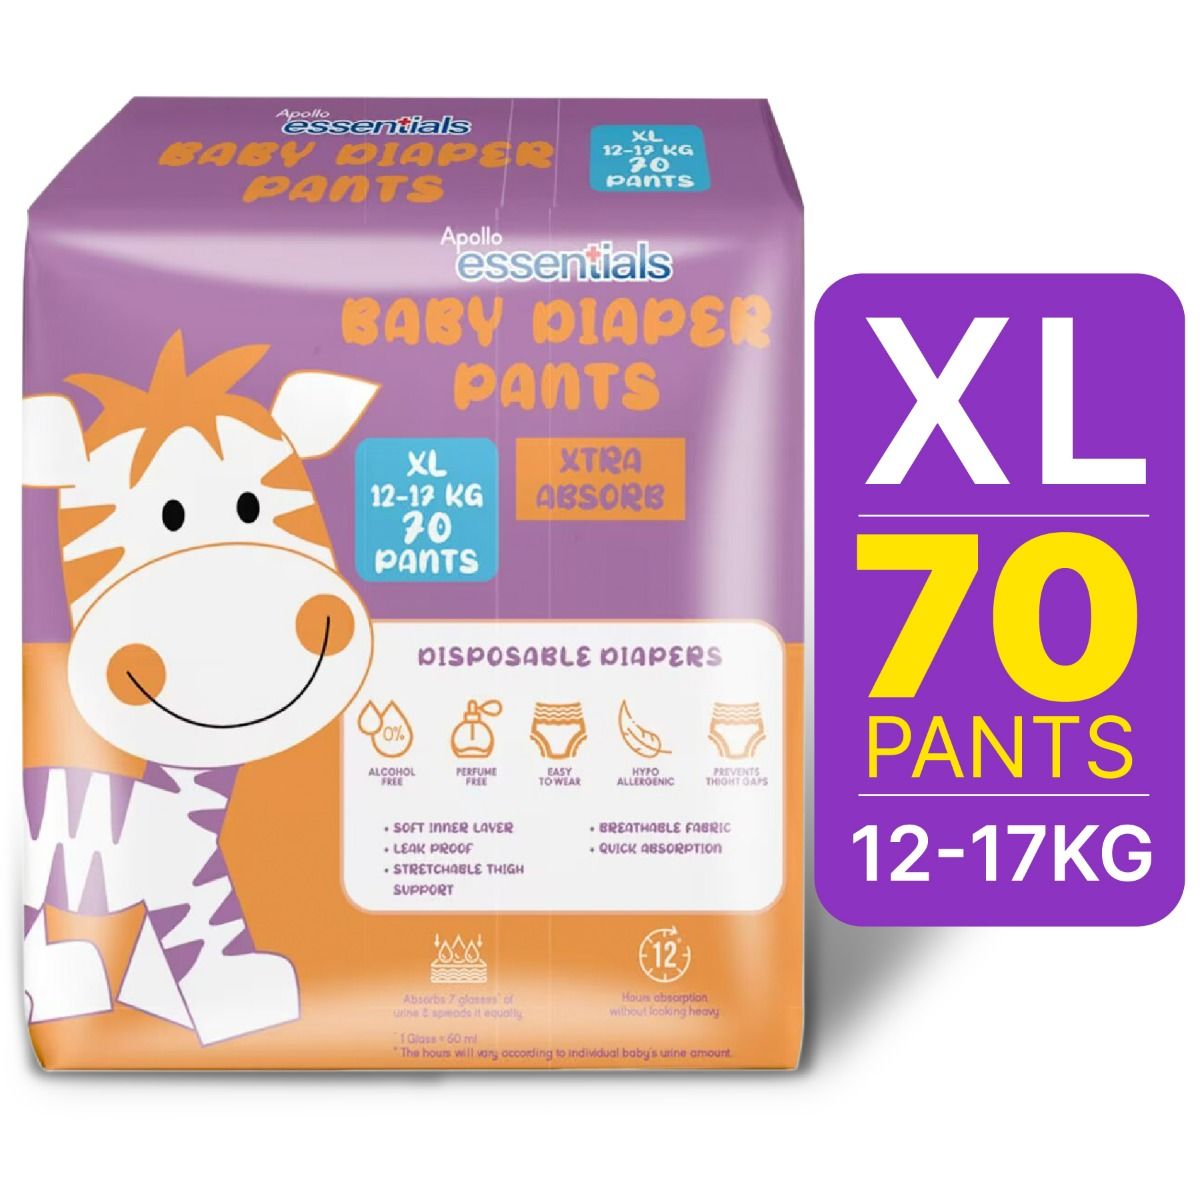 Buy Apollo Essentials Extra Absorb Baby Diaper Pants XL, 70 Count Online